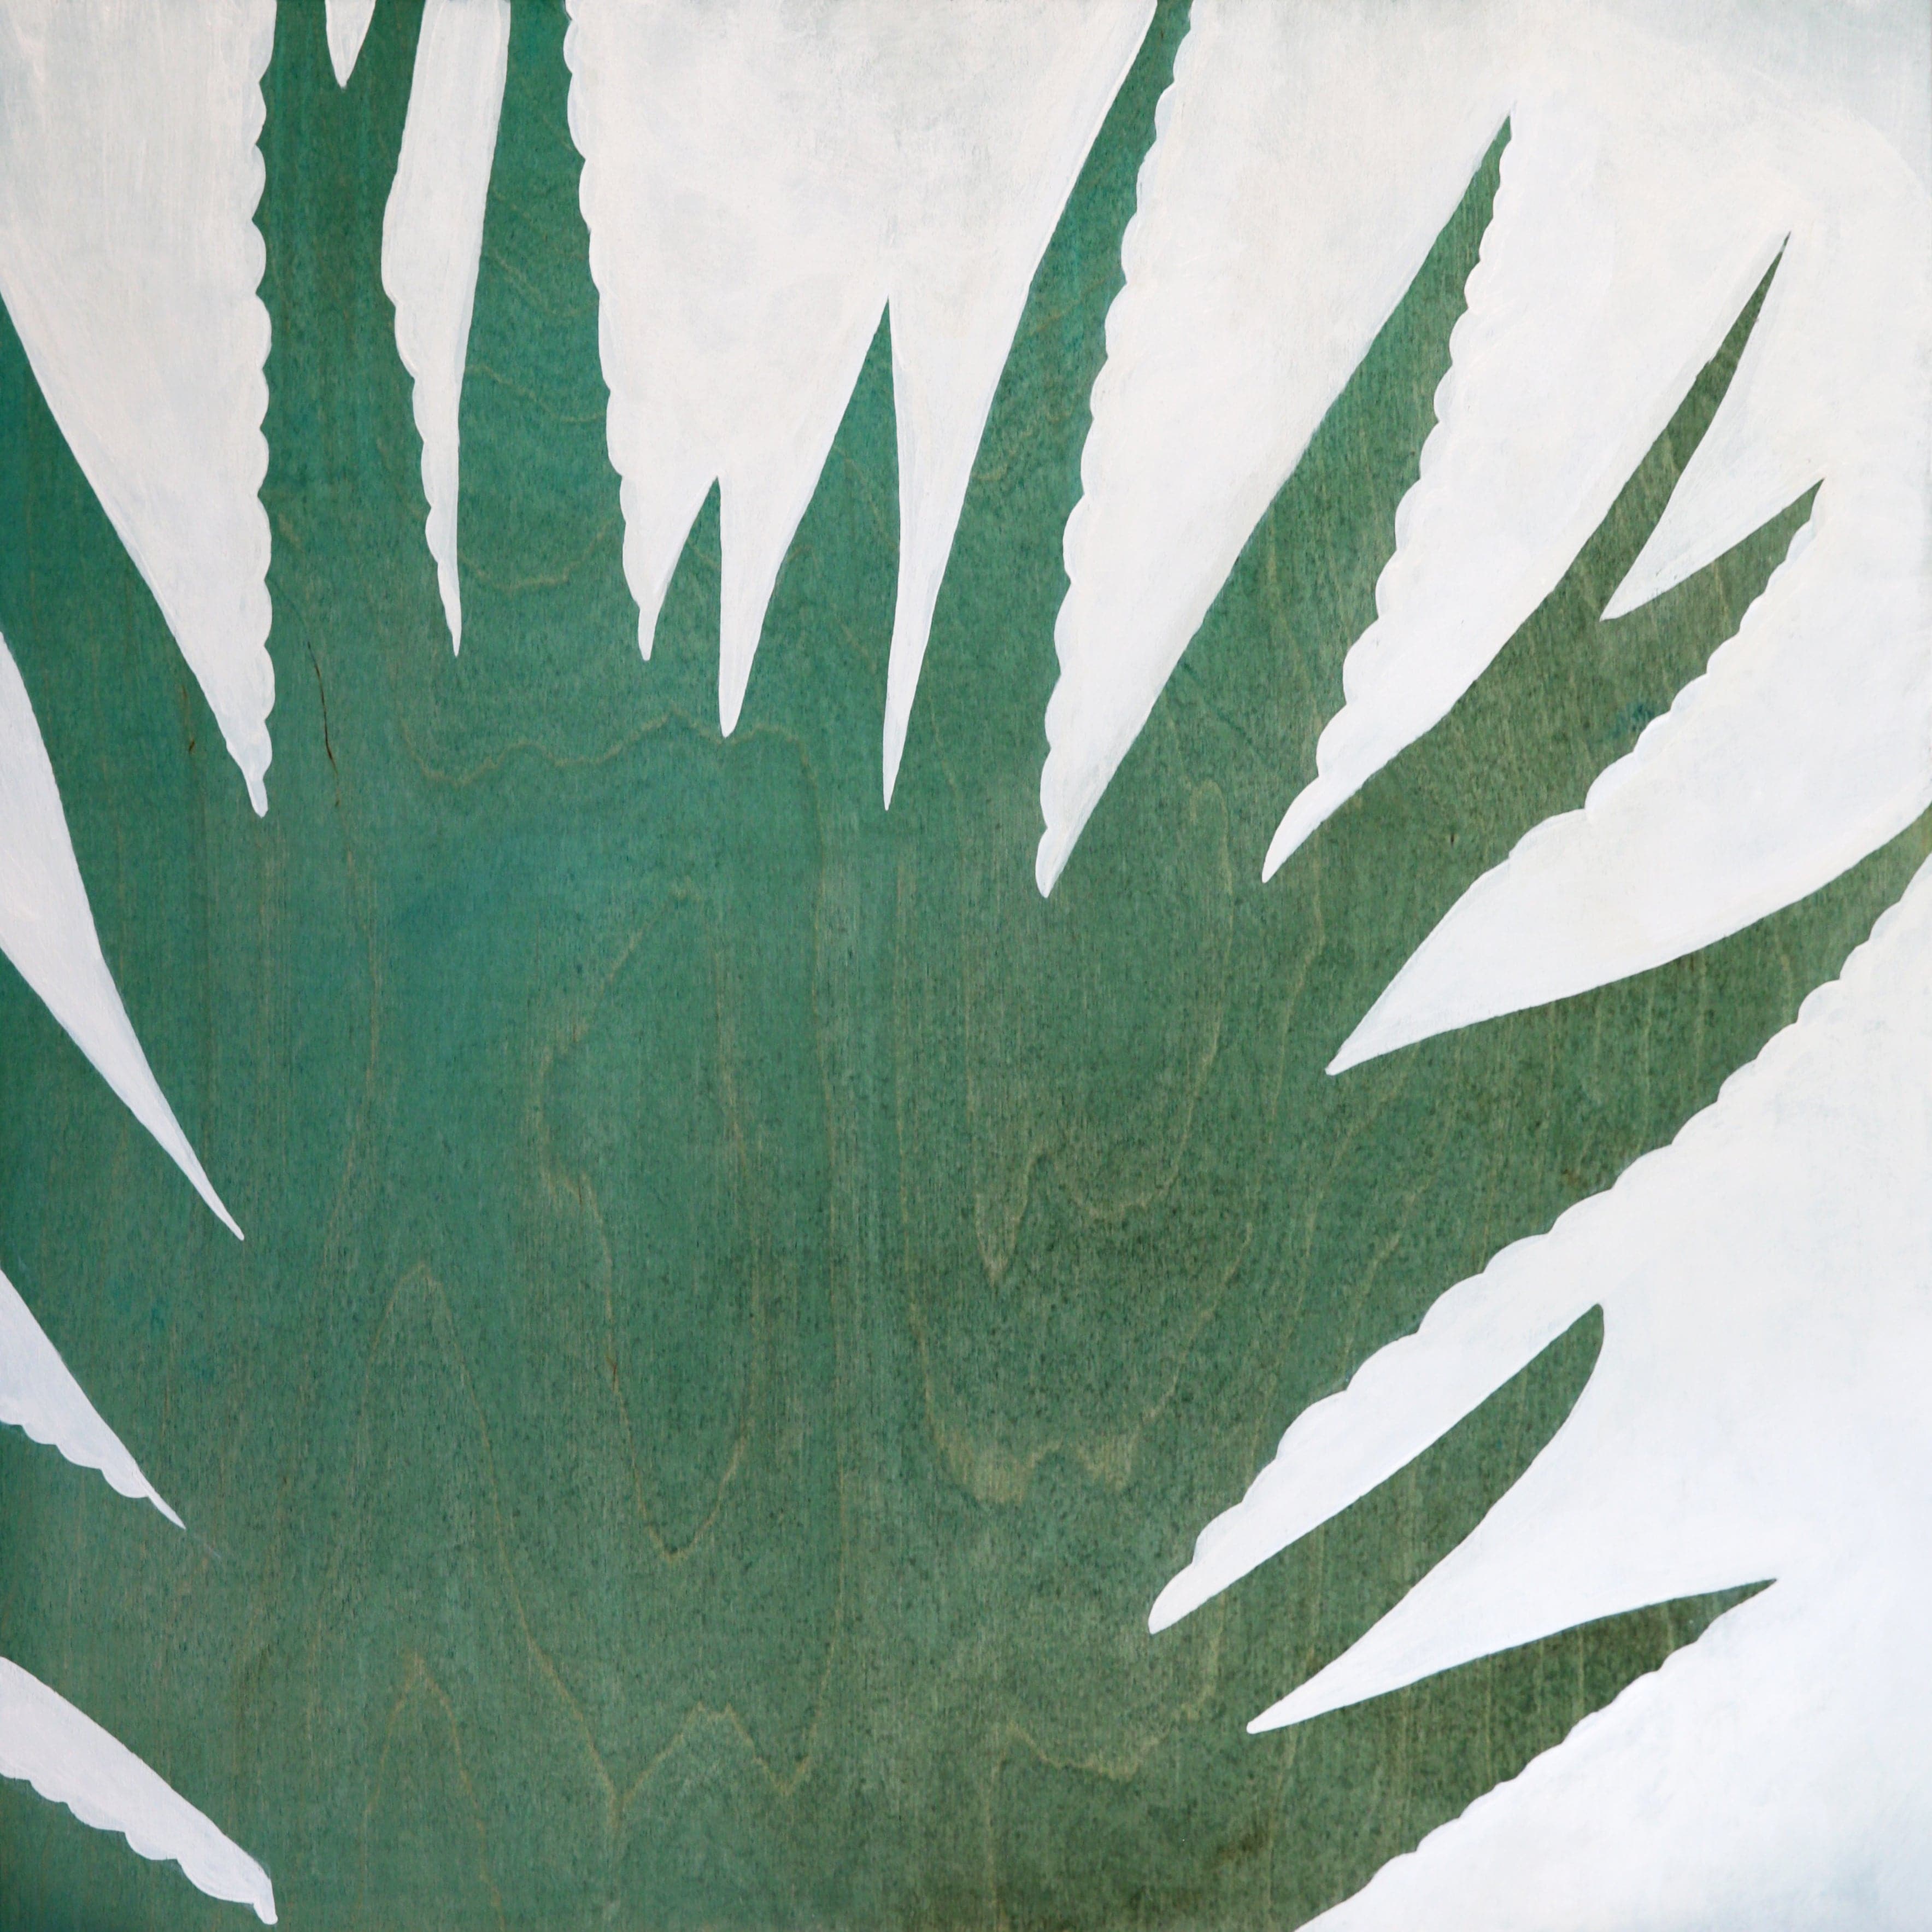 Original painting of a silhouetted rigged leafed aloe very plant in emerald green ombre colors and wood grain texture.